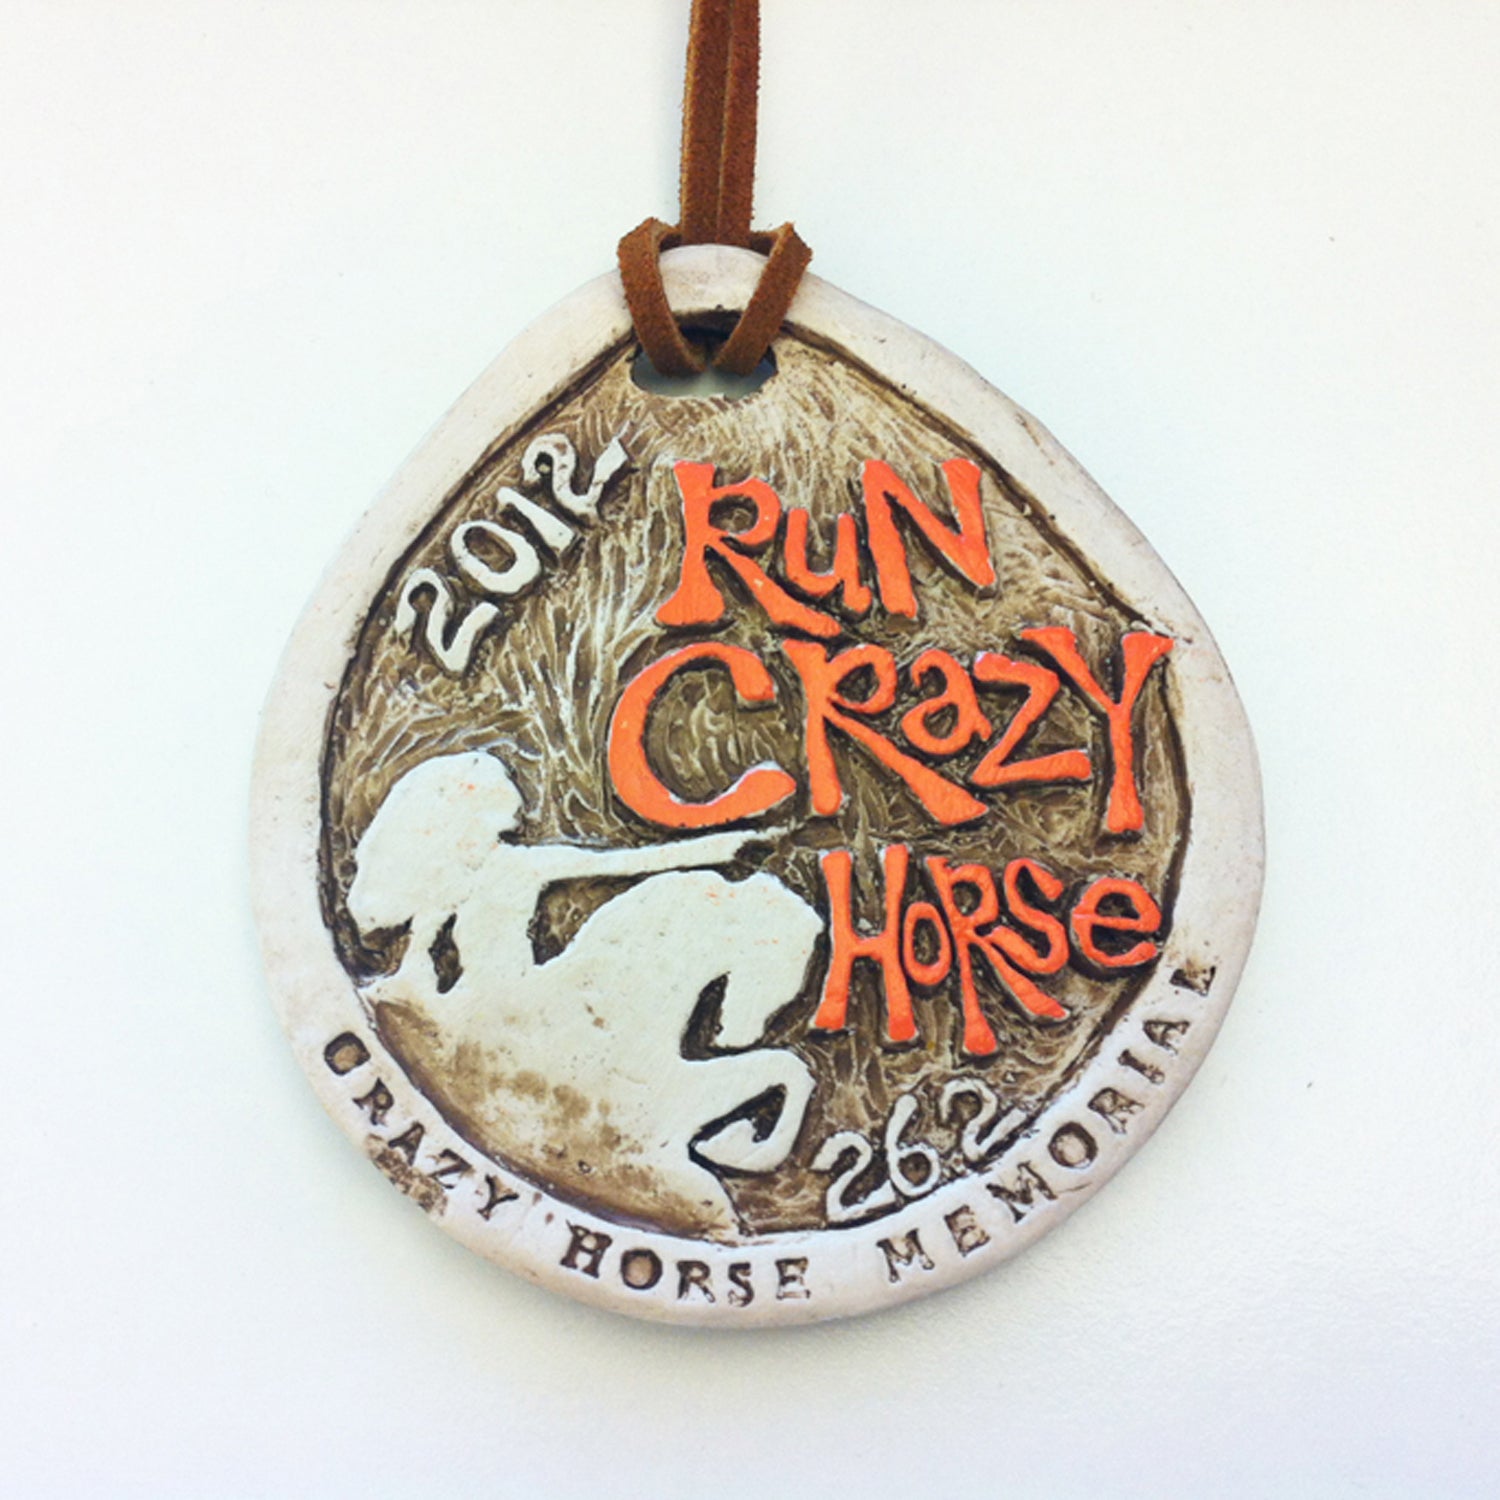 Solera: I love this medal’s grit and chiseled shape, even though the design borrows very heavily from the Big Sur International Marathon medal. It features the event’s titular sculpture, with Crazy Horse himself pointing forward, as if directing runners to follow the 26.2-mile path to glory. Made from clay and featuring a hand-tied leather strap, you might suspect your medal was the only one made.